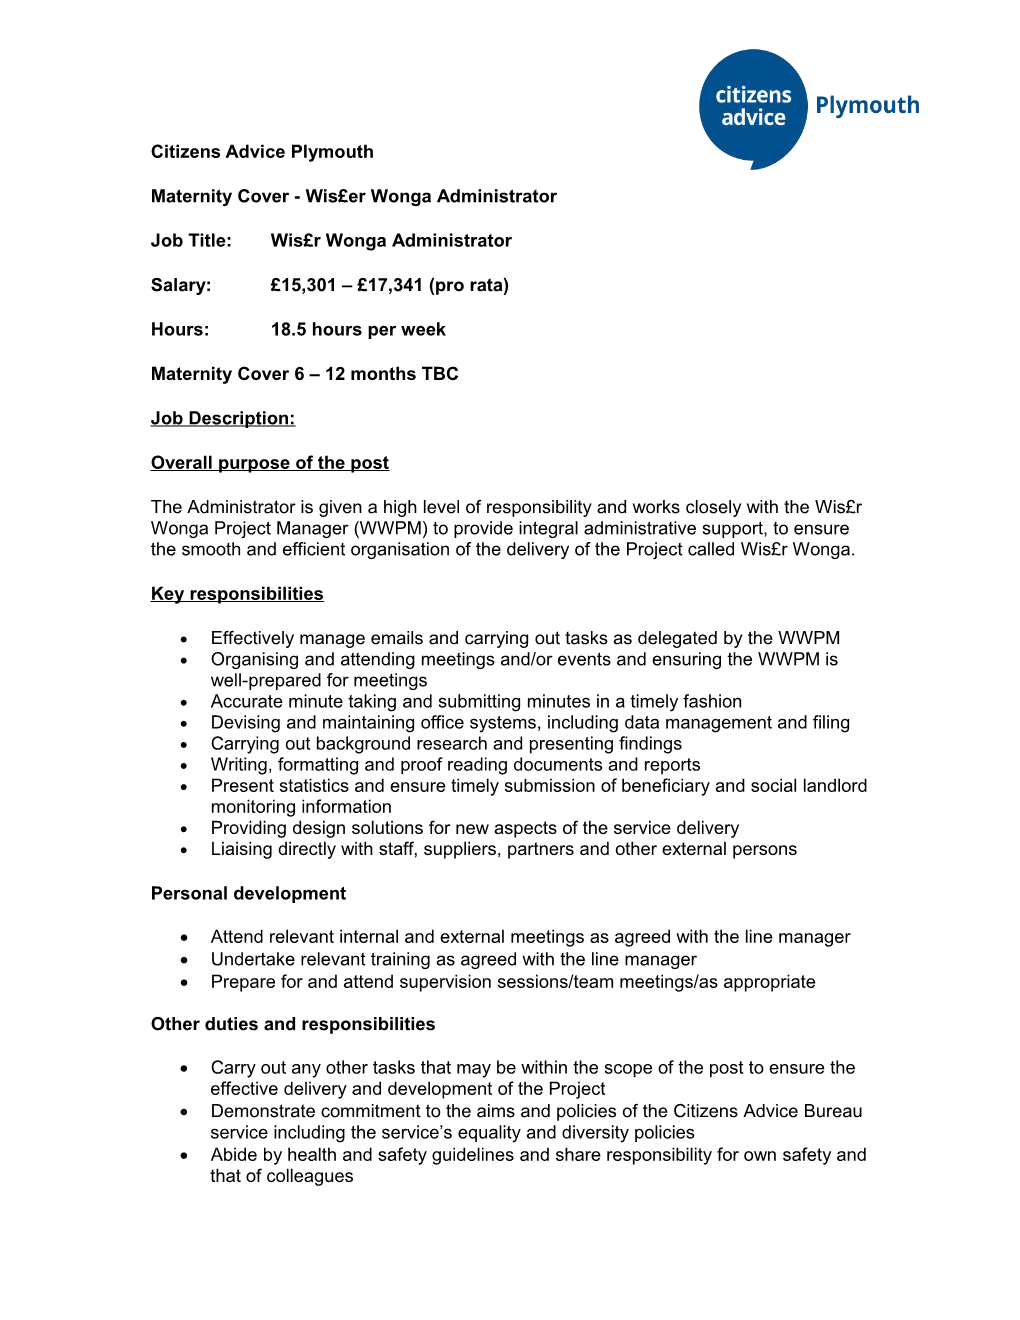 Specialist Adviser and Caseworker Job Description and Person Specification